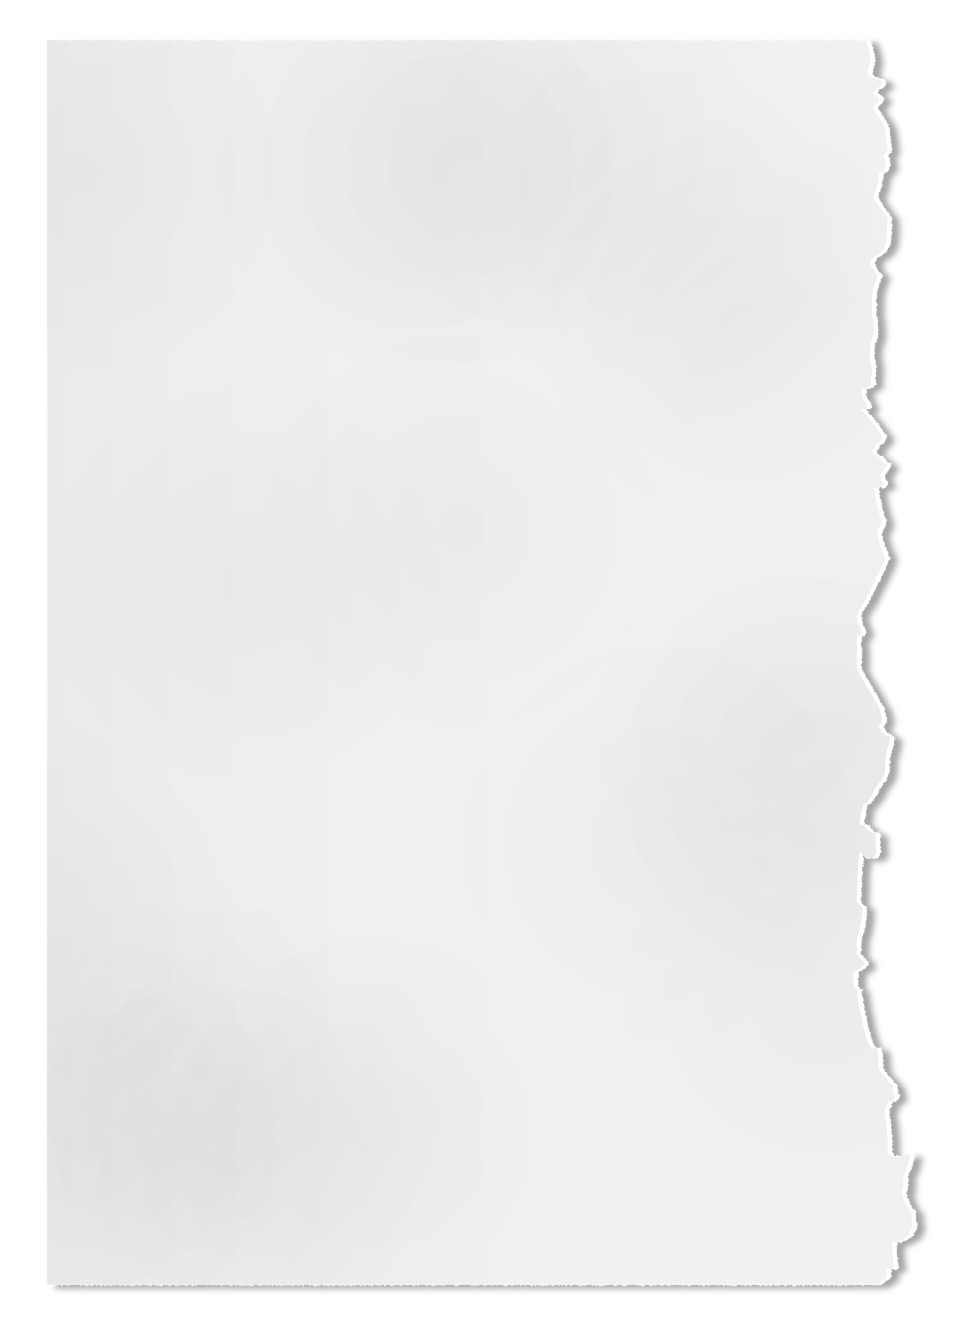 Paper PNG Free Download